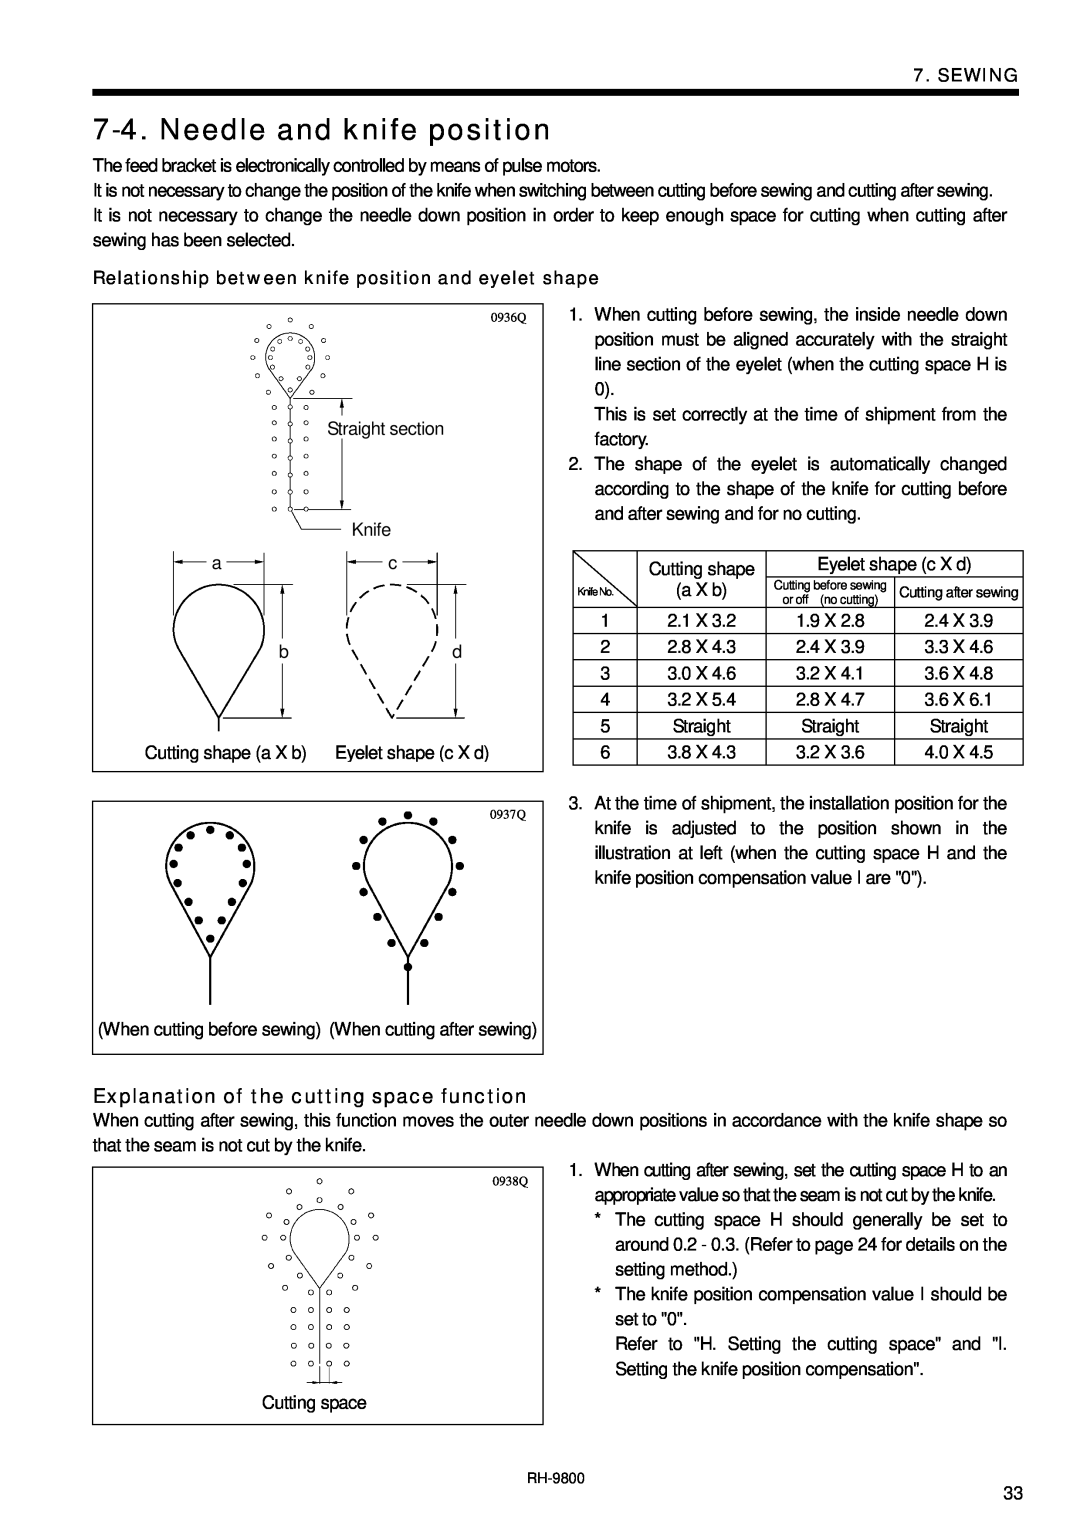 Brother DH4-B980 instruction manual Needle and knife position, Explanation of the cutting space function, Sewing 